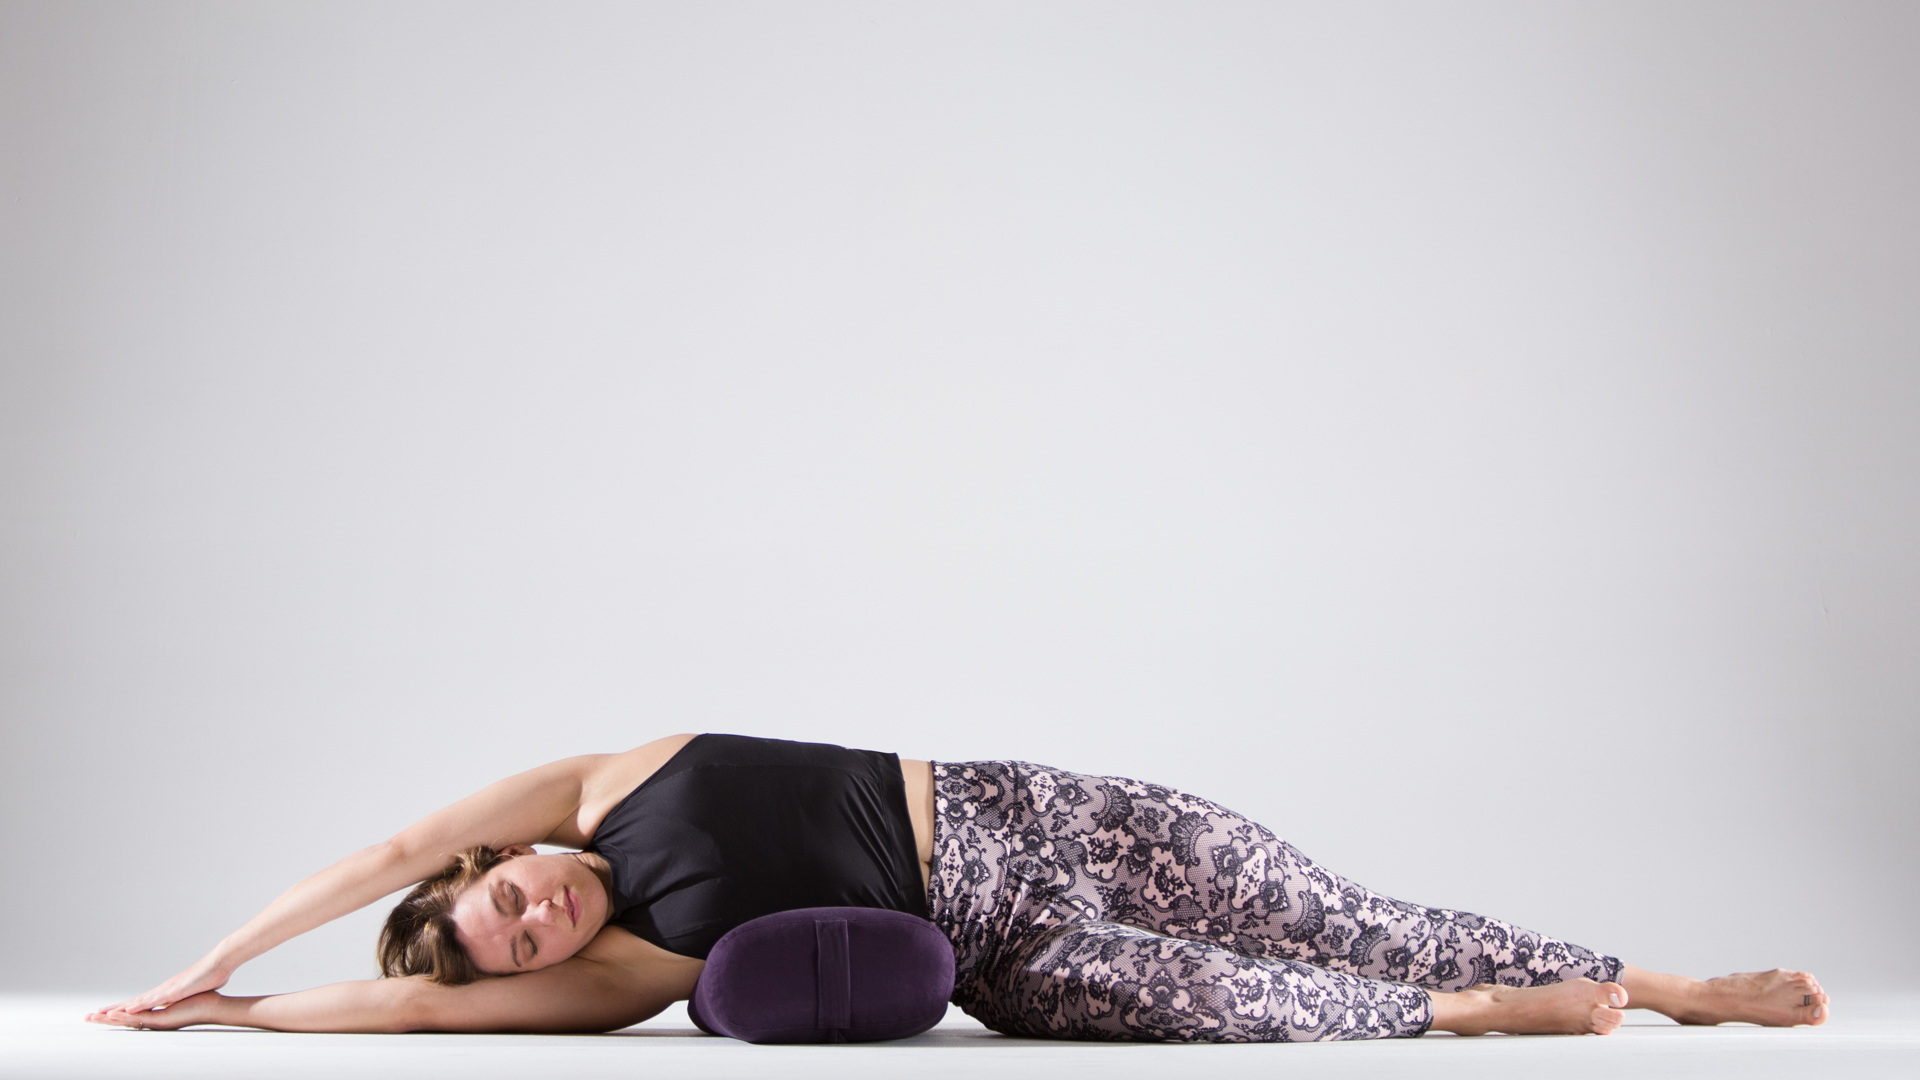 Yin Yoga: Tips For Developing Your Practice